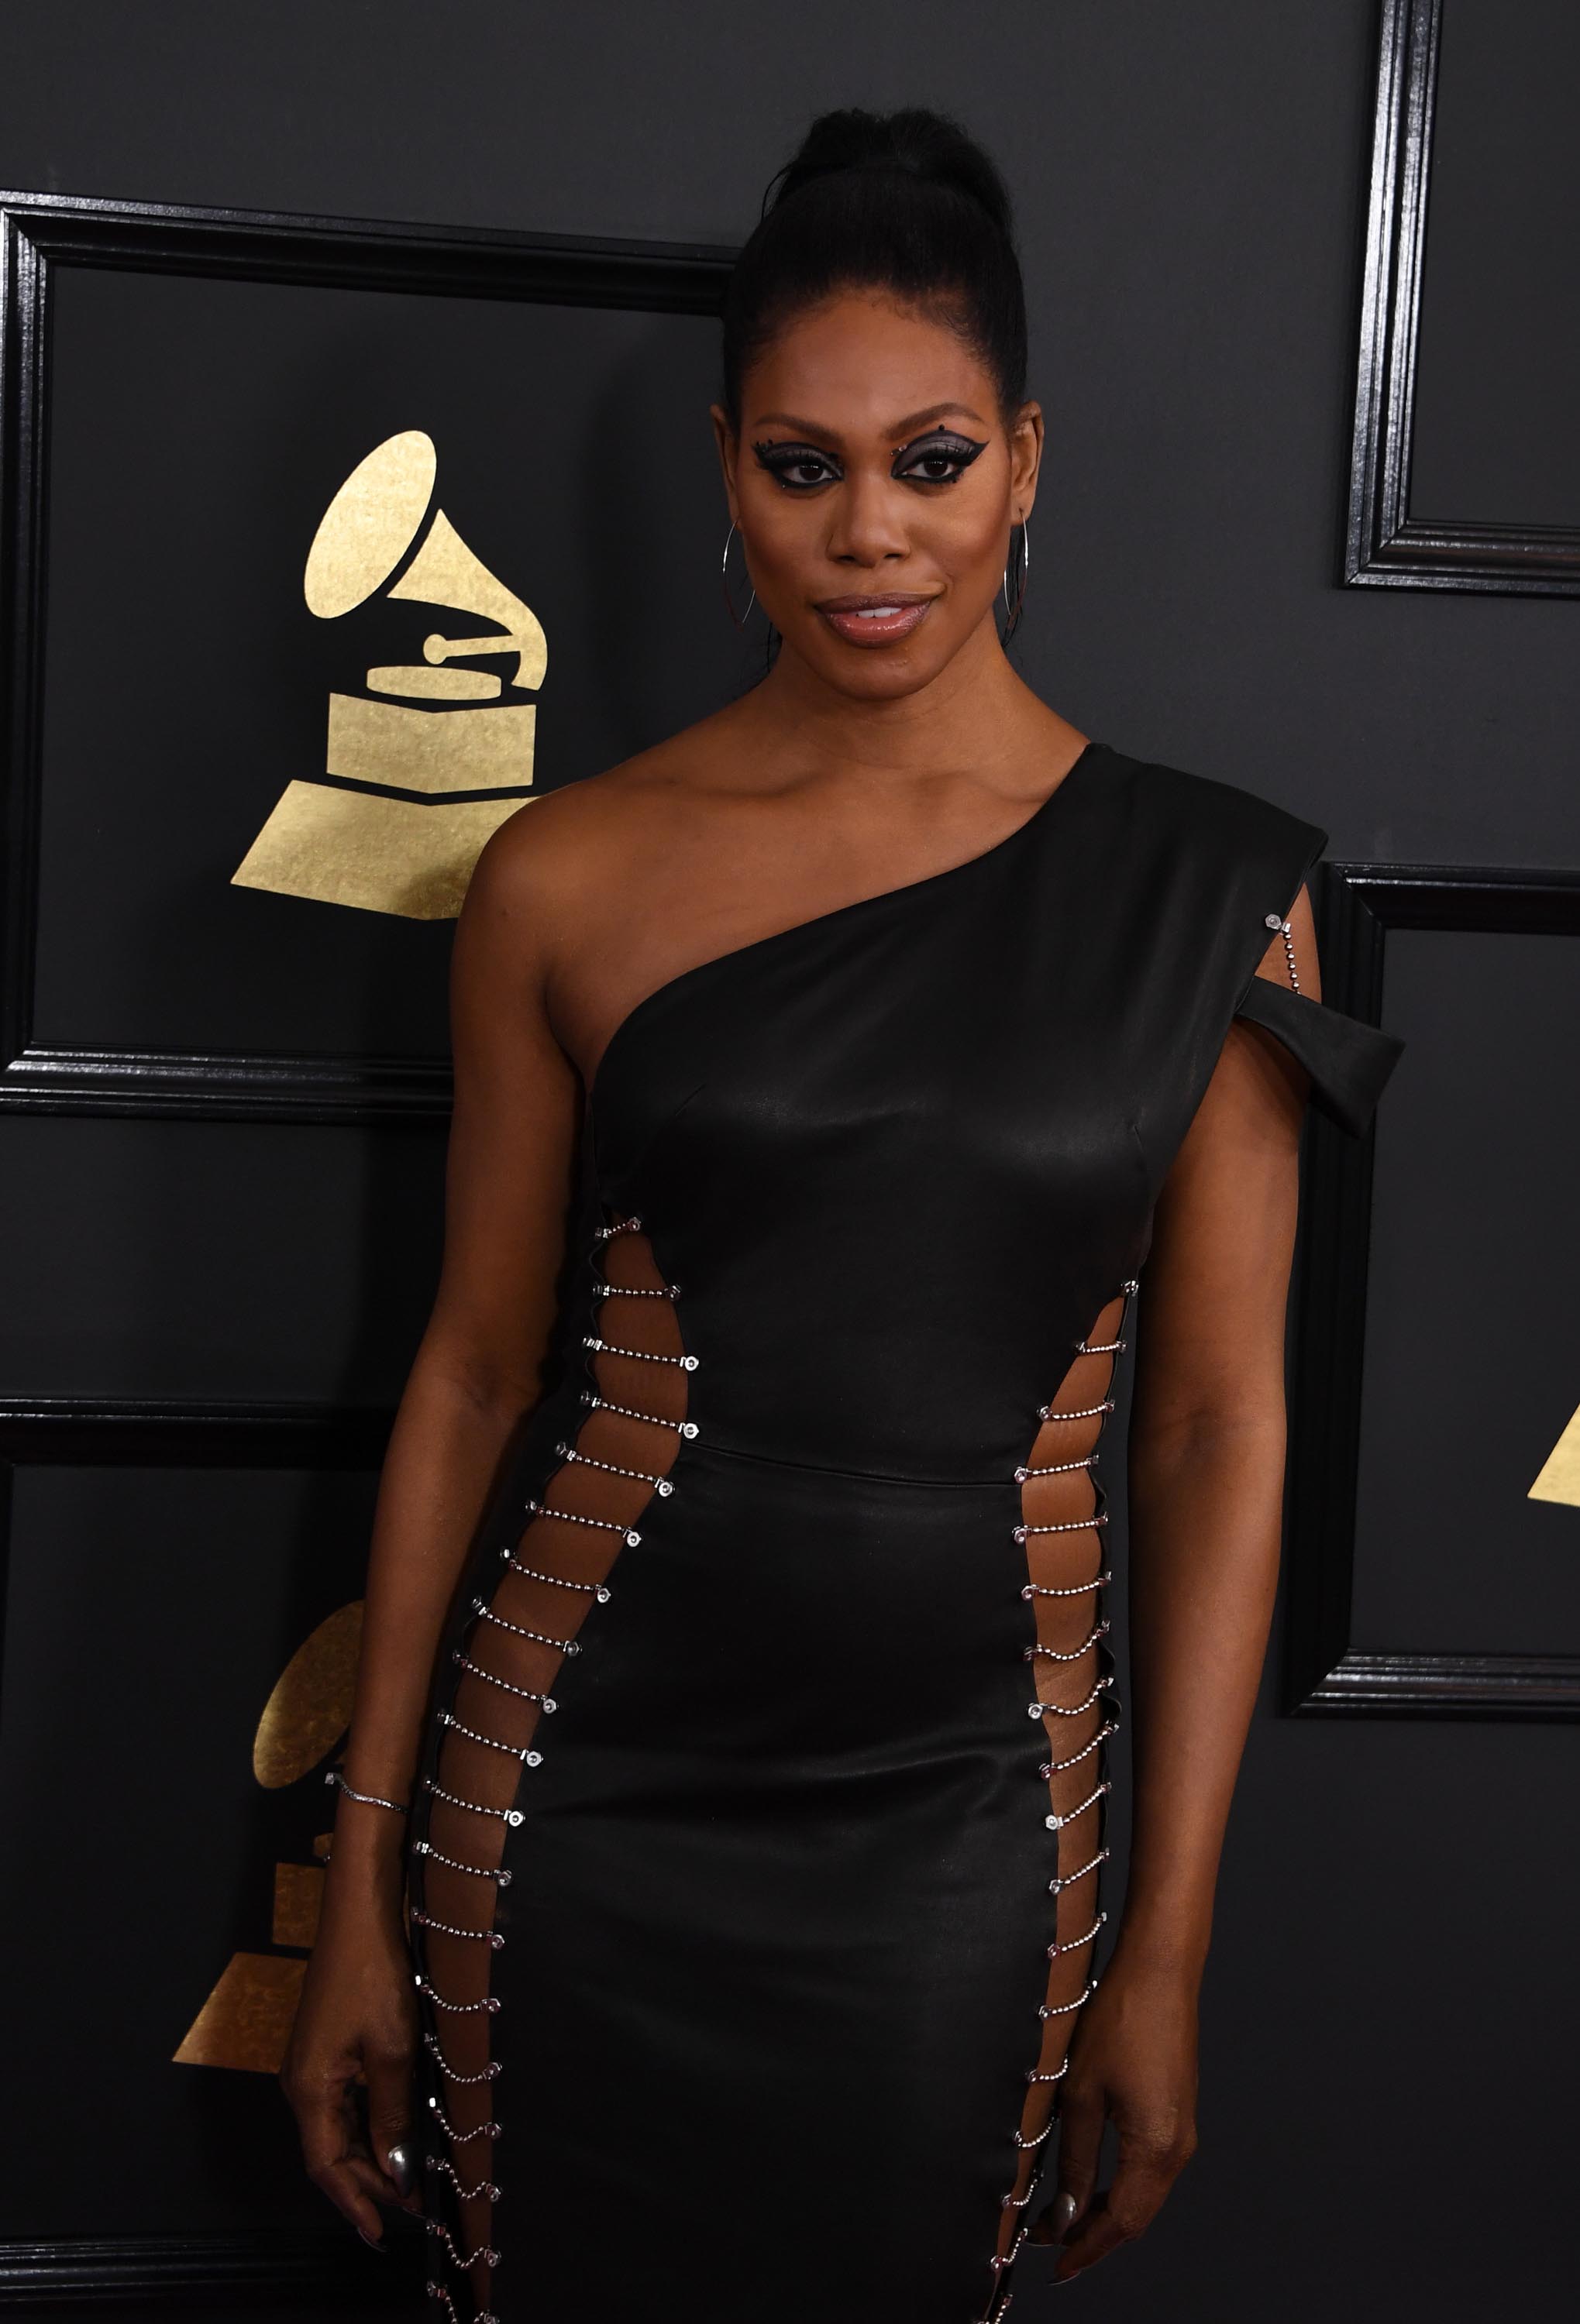 Laverne Cox attends The 59th GRAMMY Awards